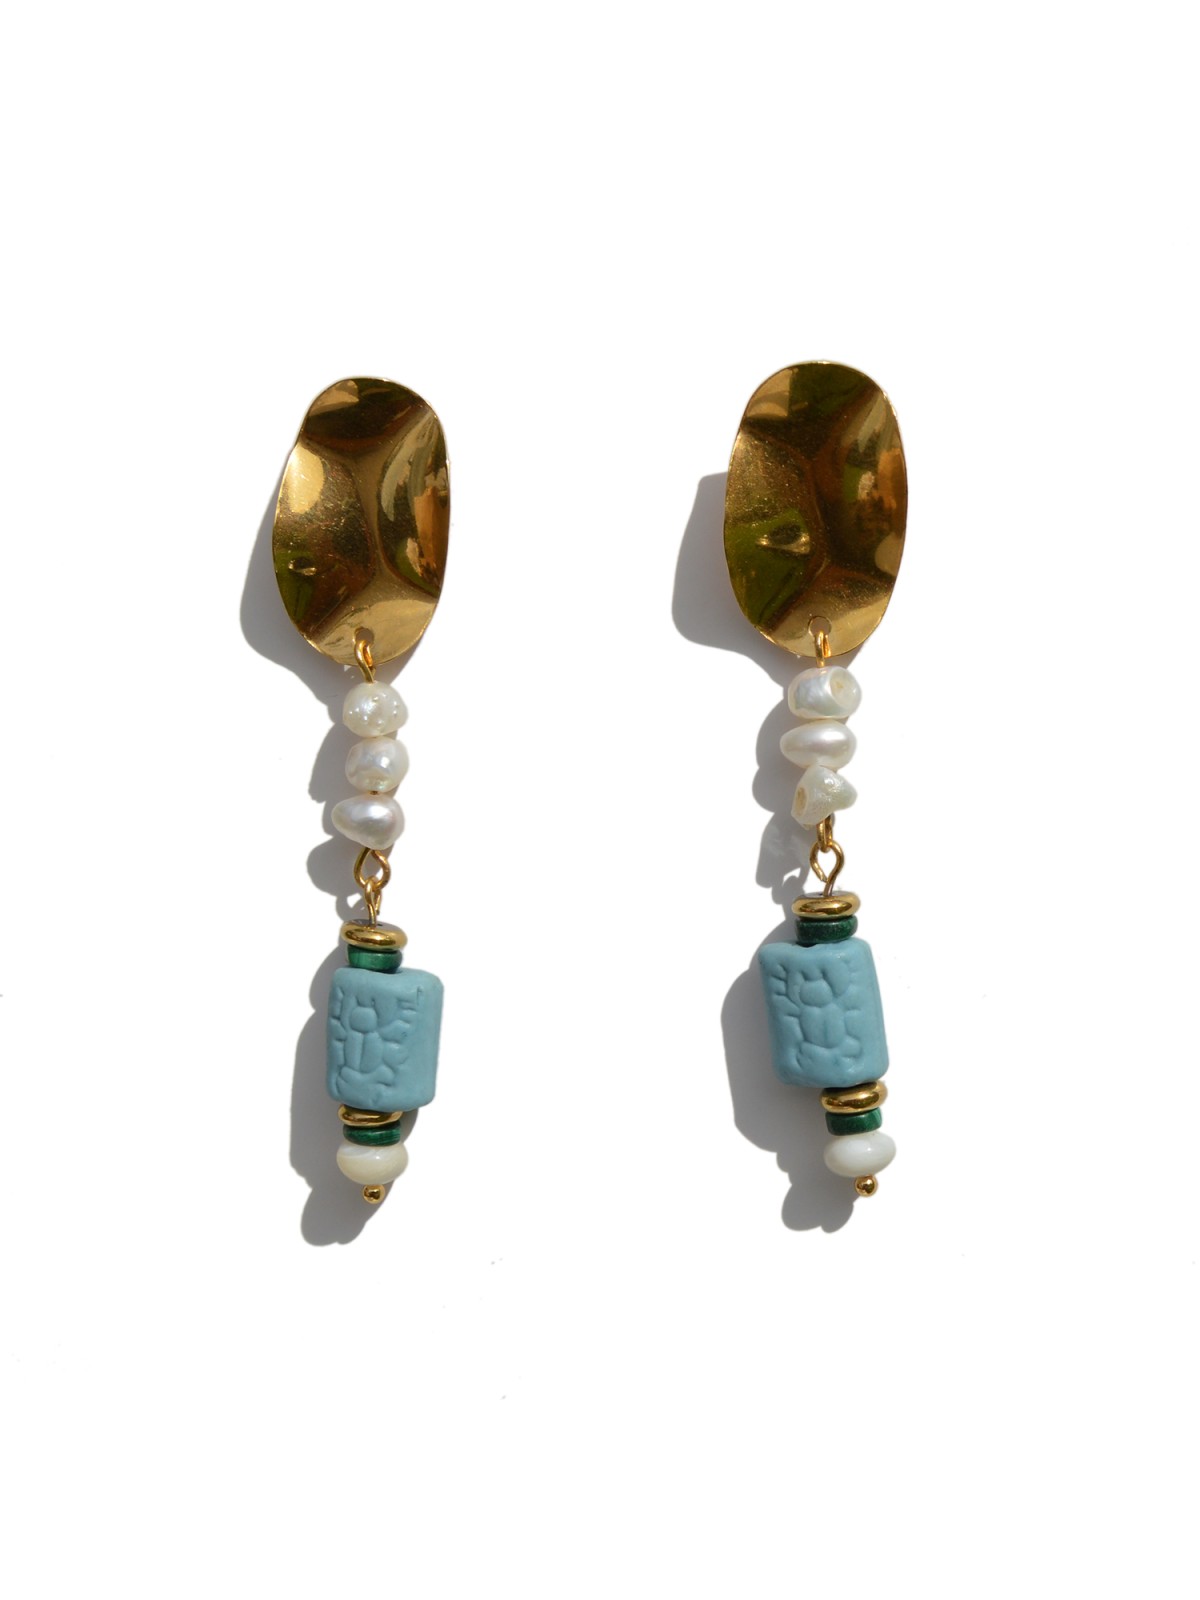 Faraona earrings with river pearls and beads.